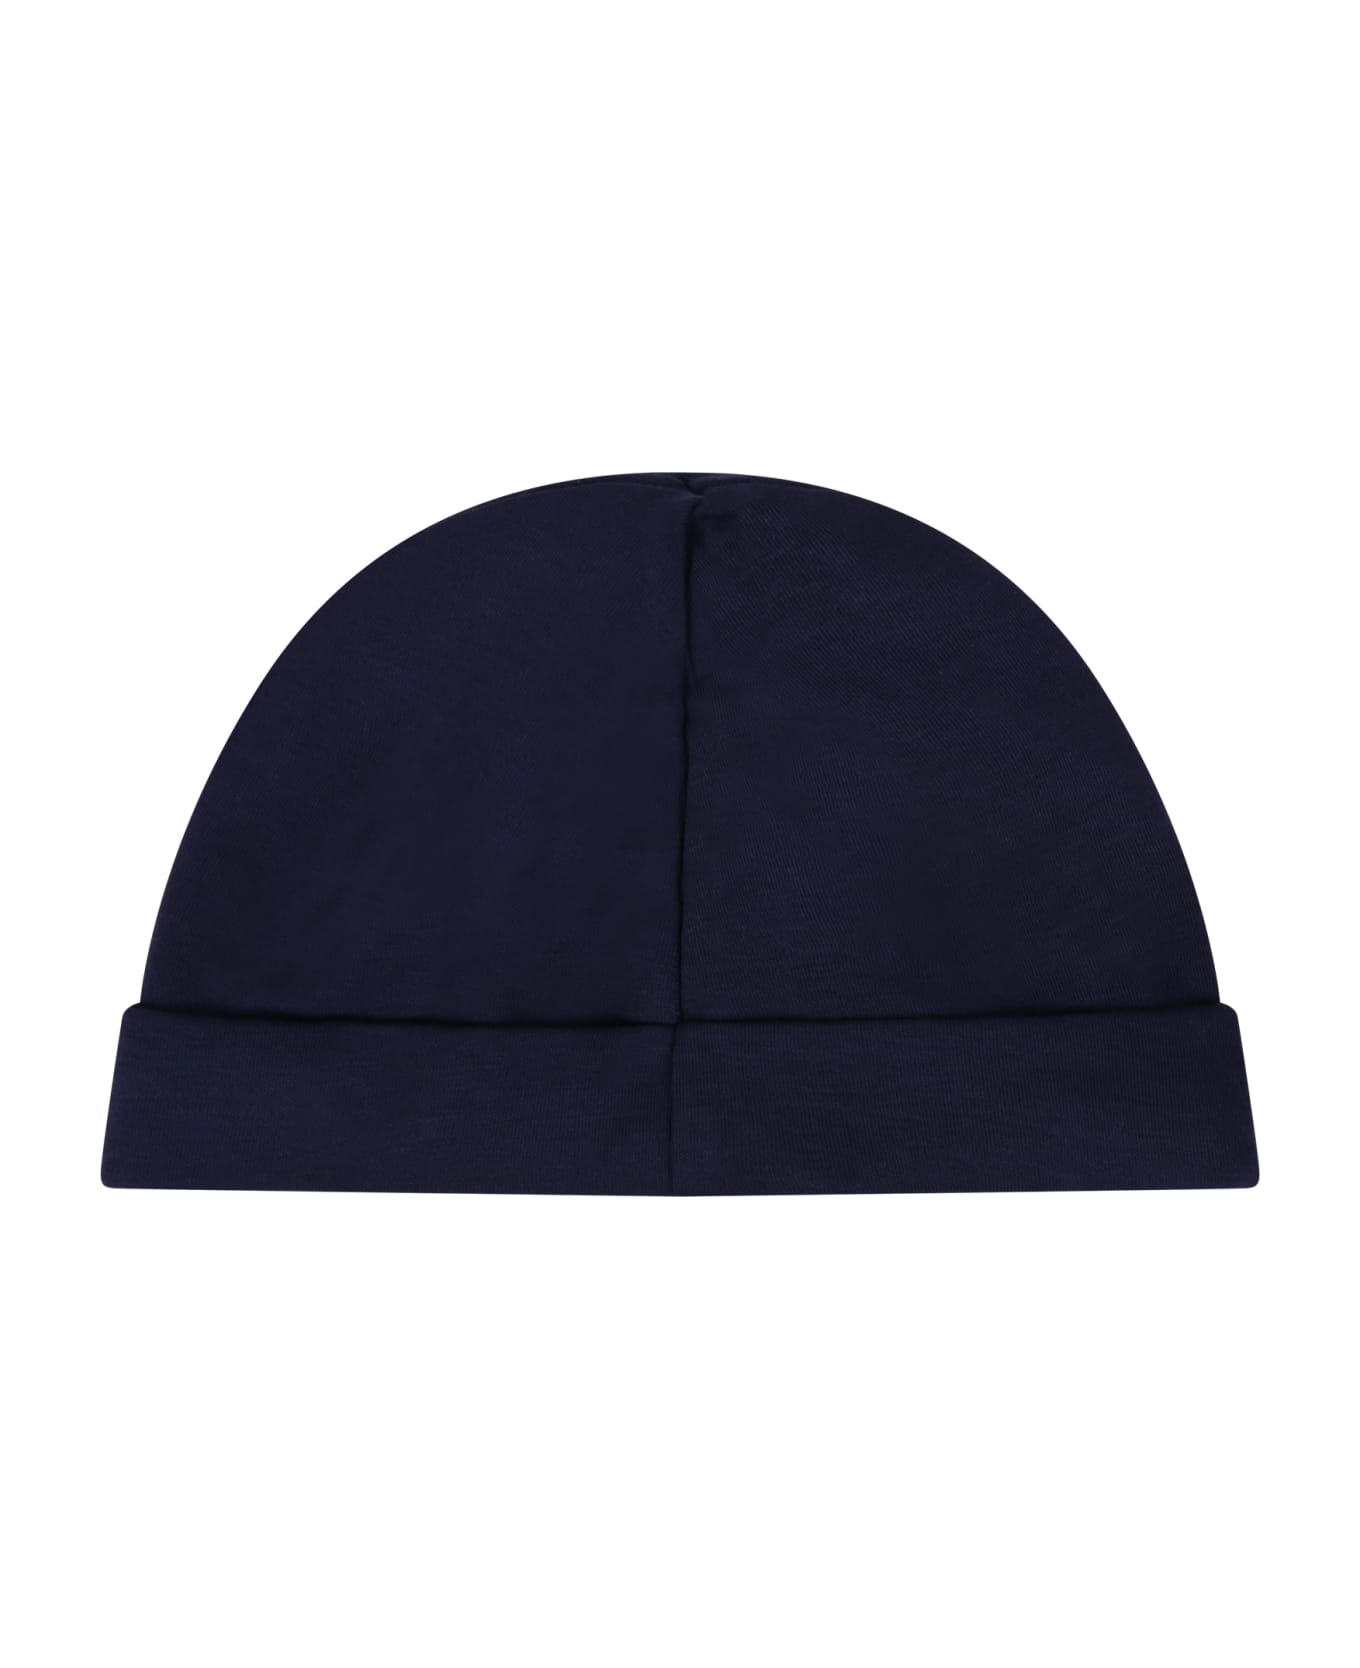 Ralph Lauren Blue Hat For Babyboy With Pony Logo - Blue アクセサリー＆ギフト